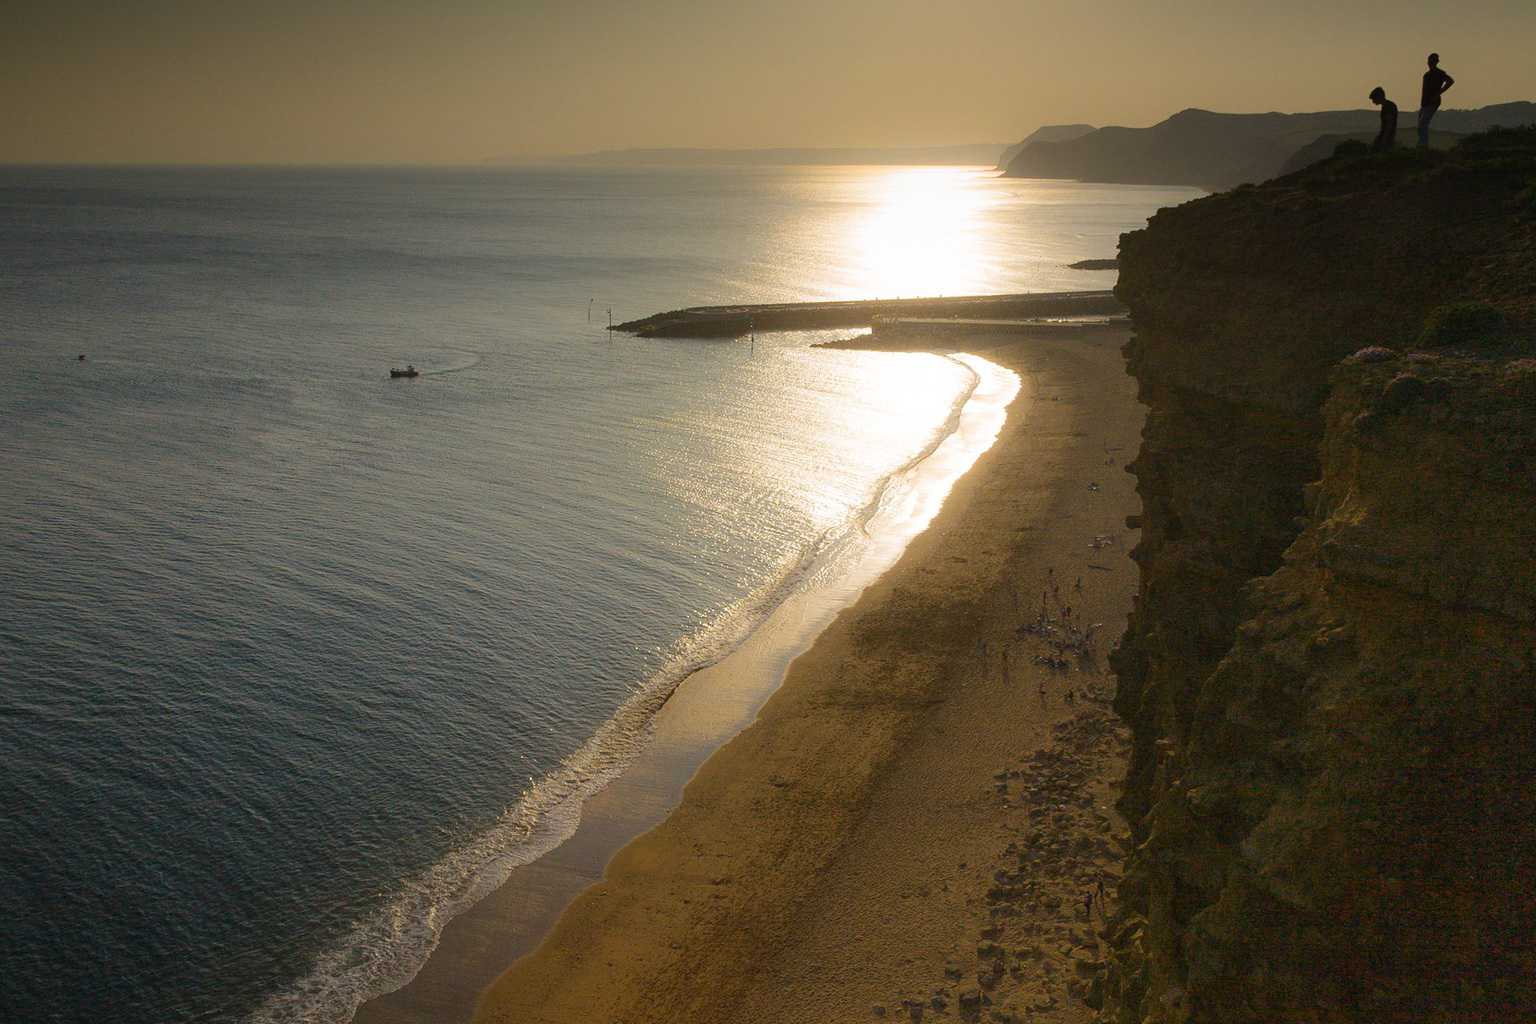  The view of the beach at West bay from the cliffs above 